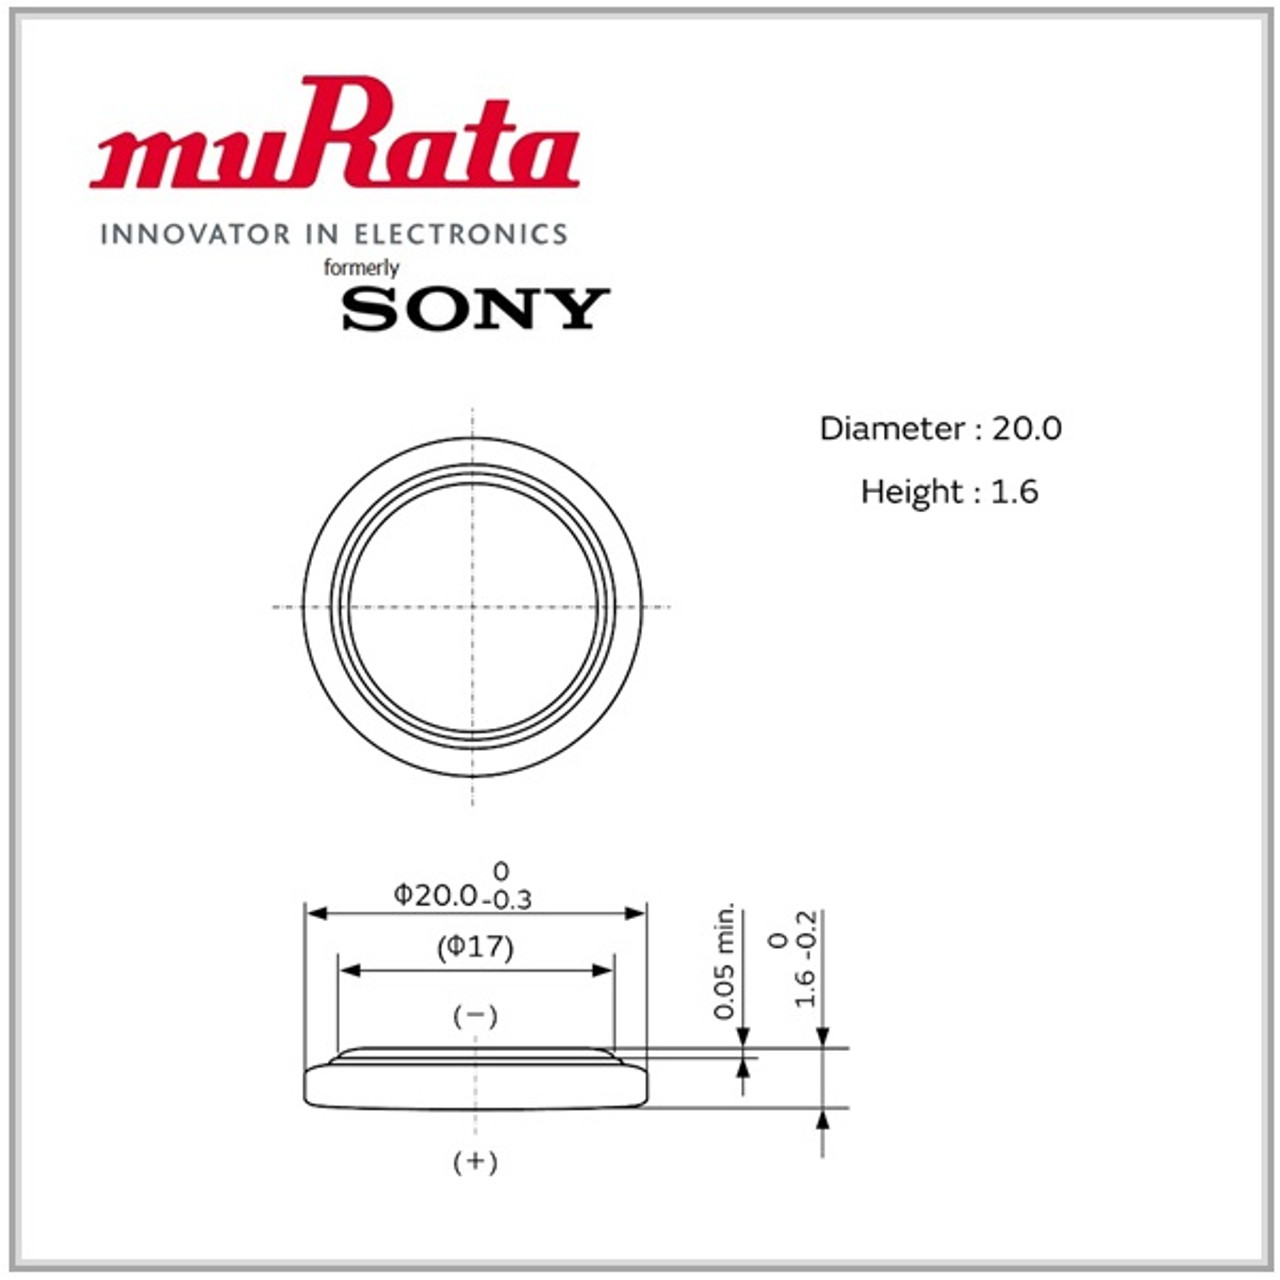 50 Genuine MURATA Replaces Sony CR2016 Lithium 3v Coin Cell Batteries